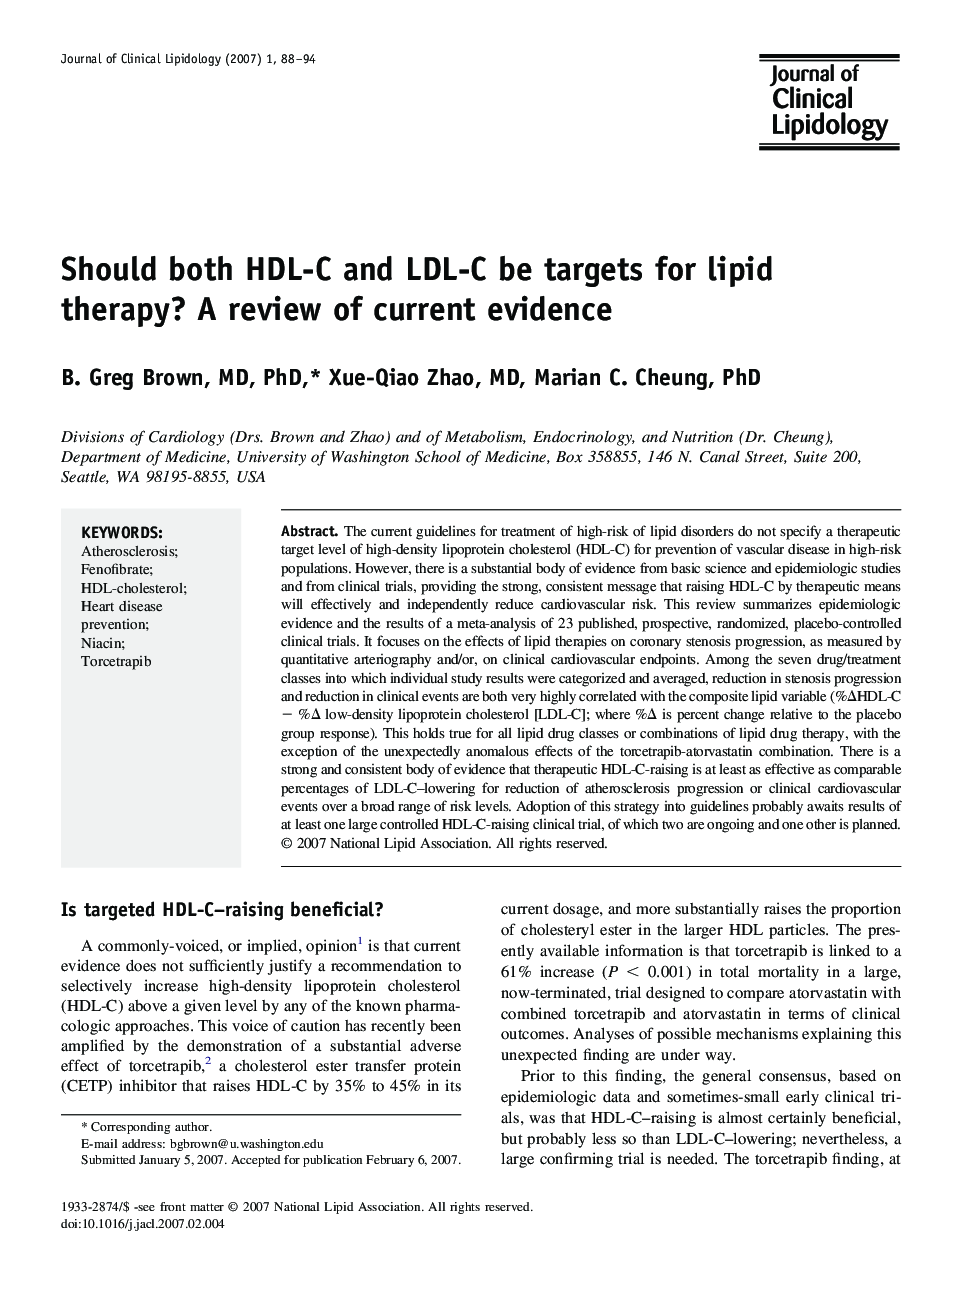 Should both HDL-C and LDL-C be targets for lipid therapy? A review of current evidence